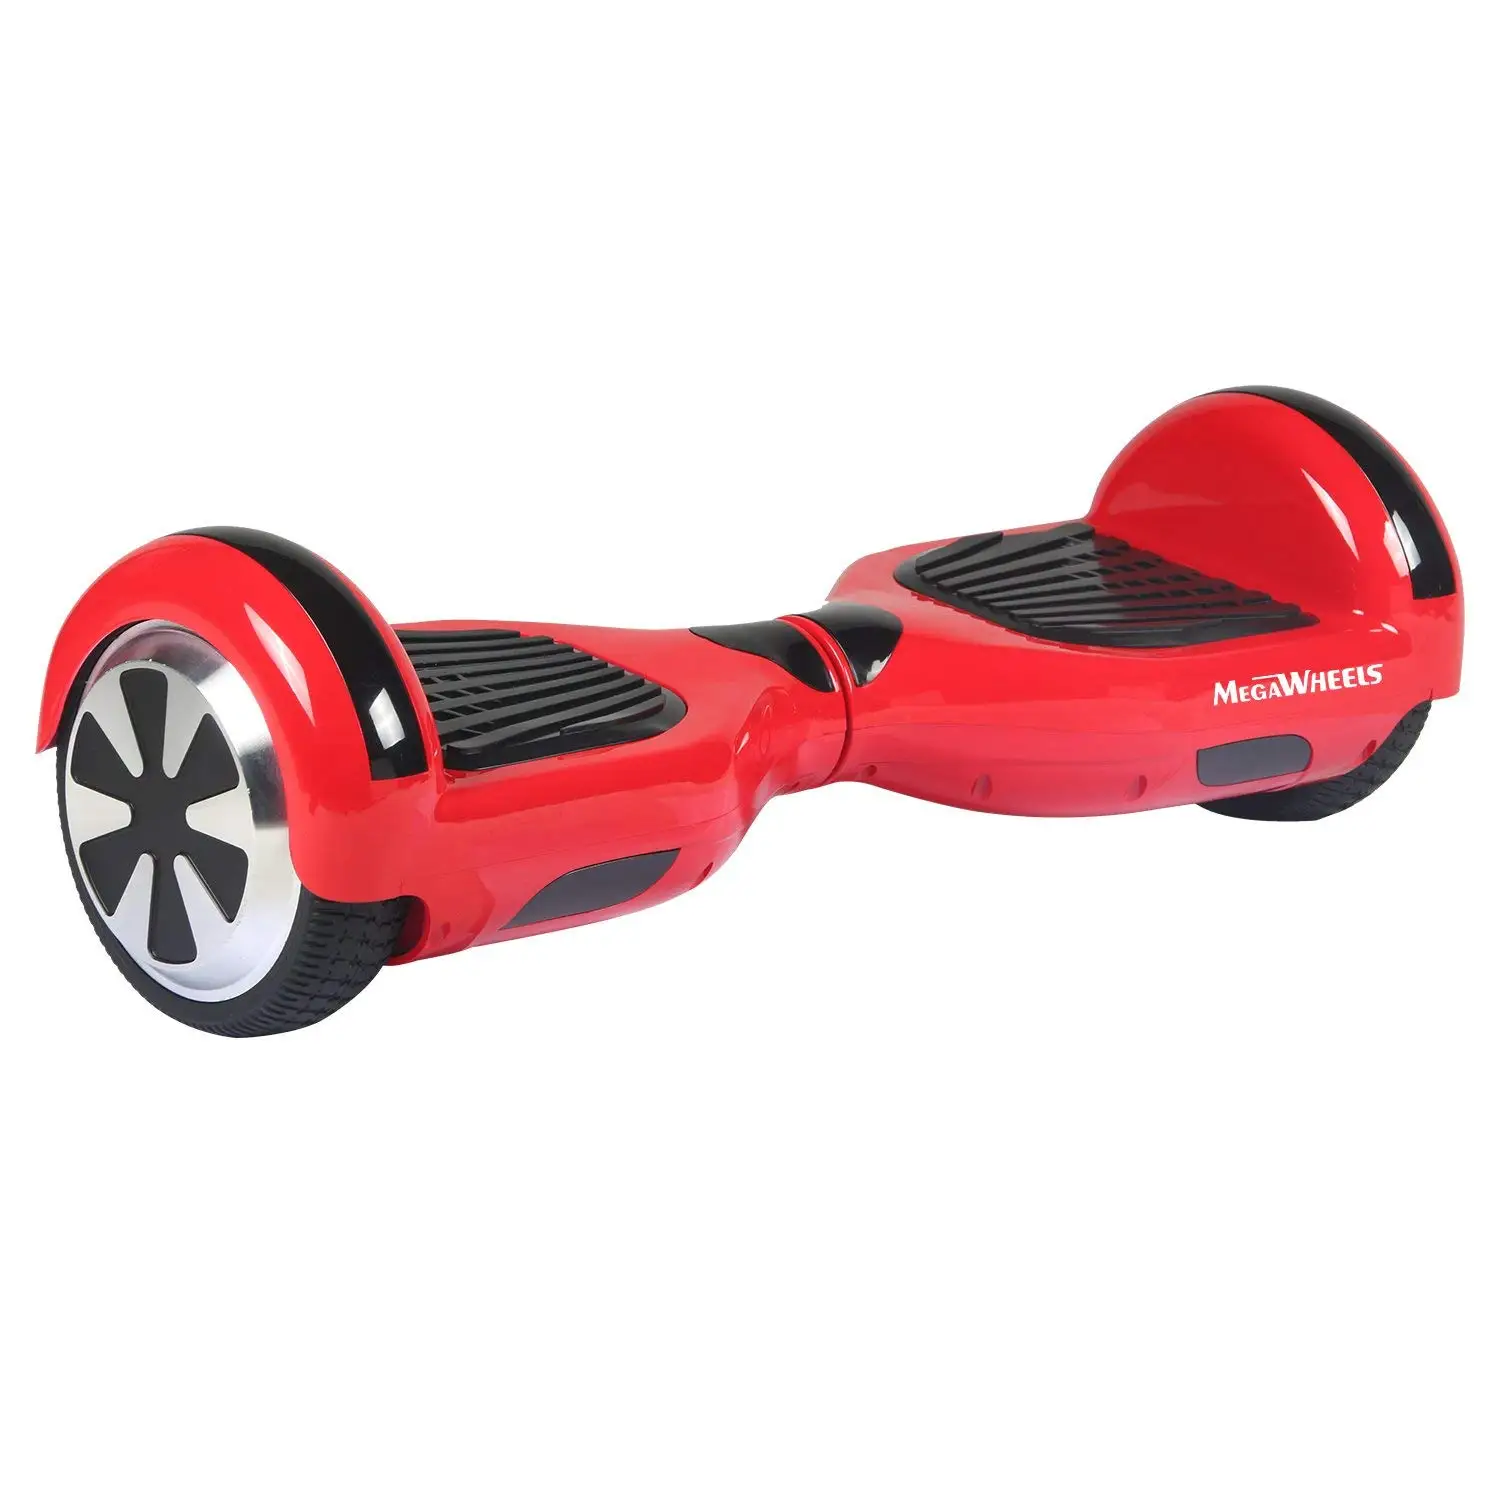 two wheel self balancing electric scooter